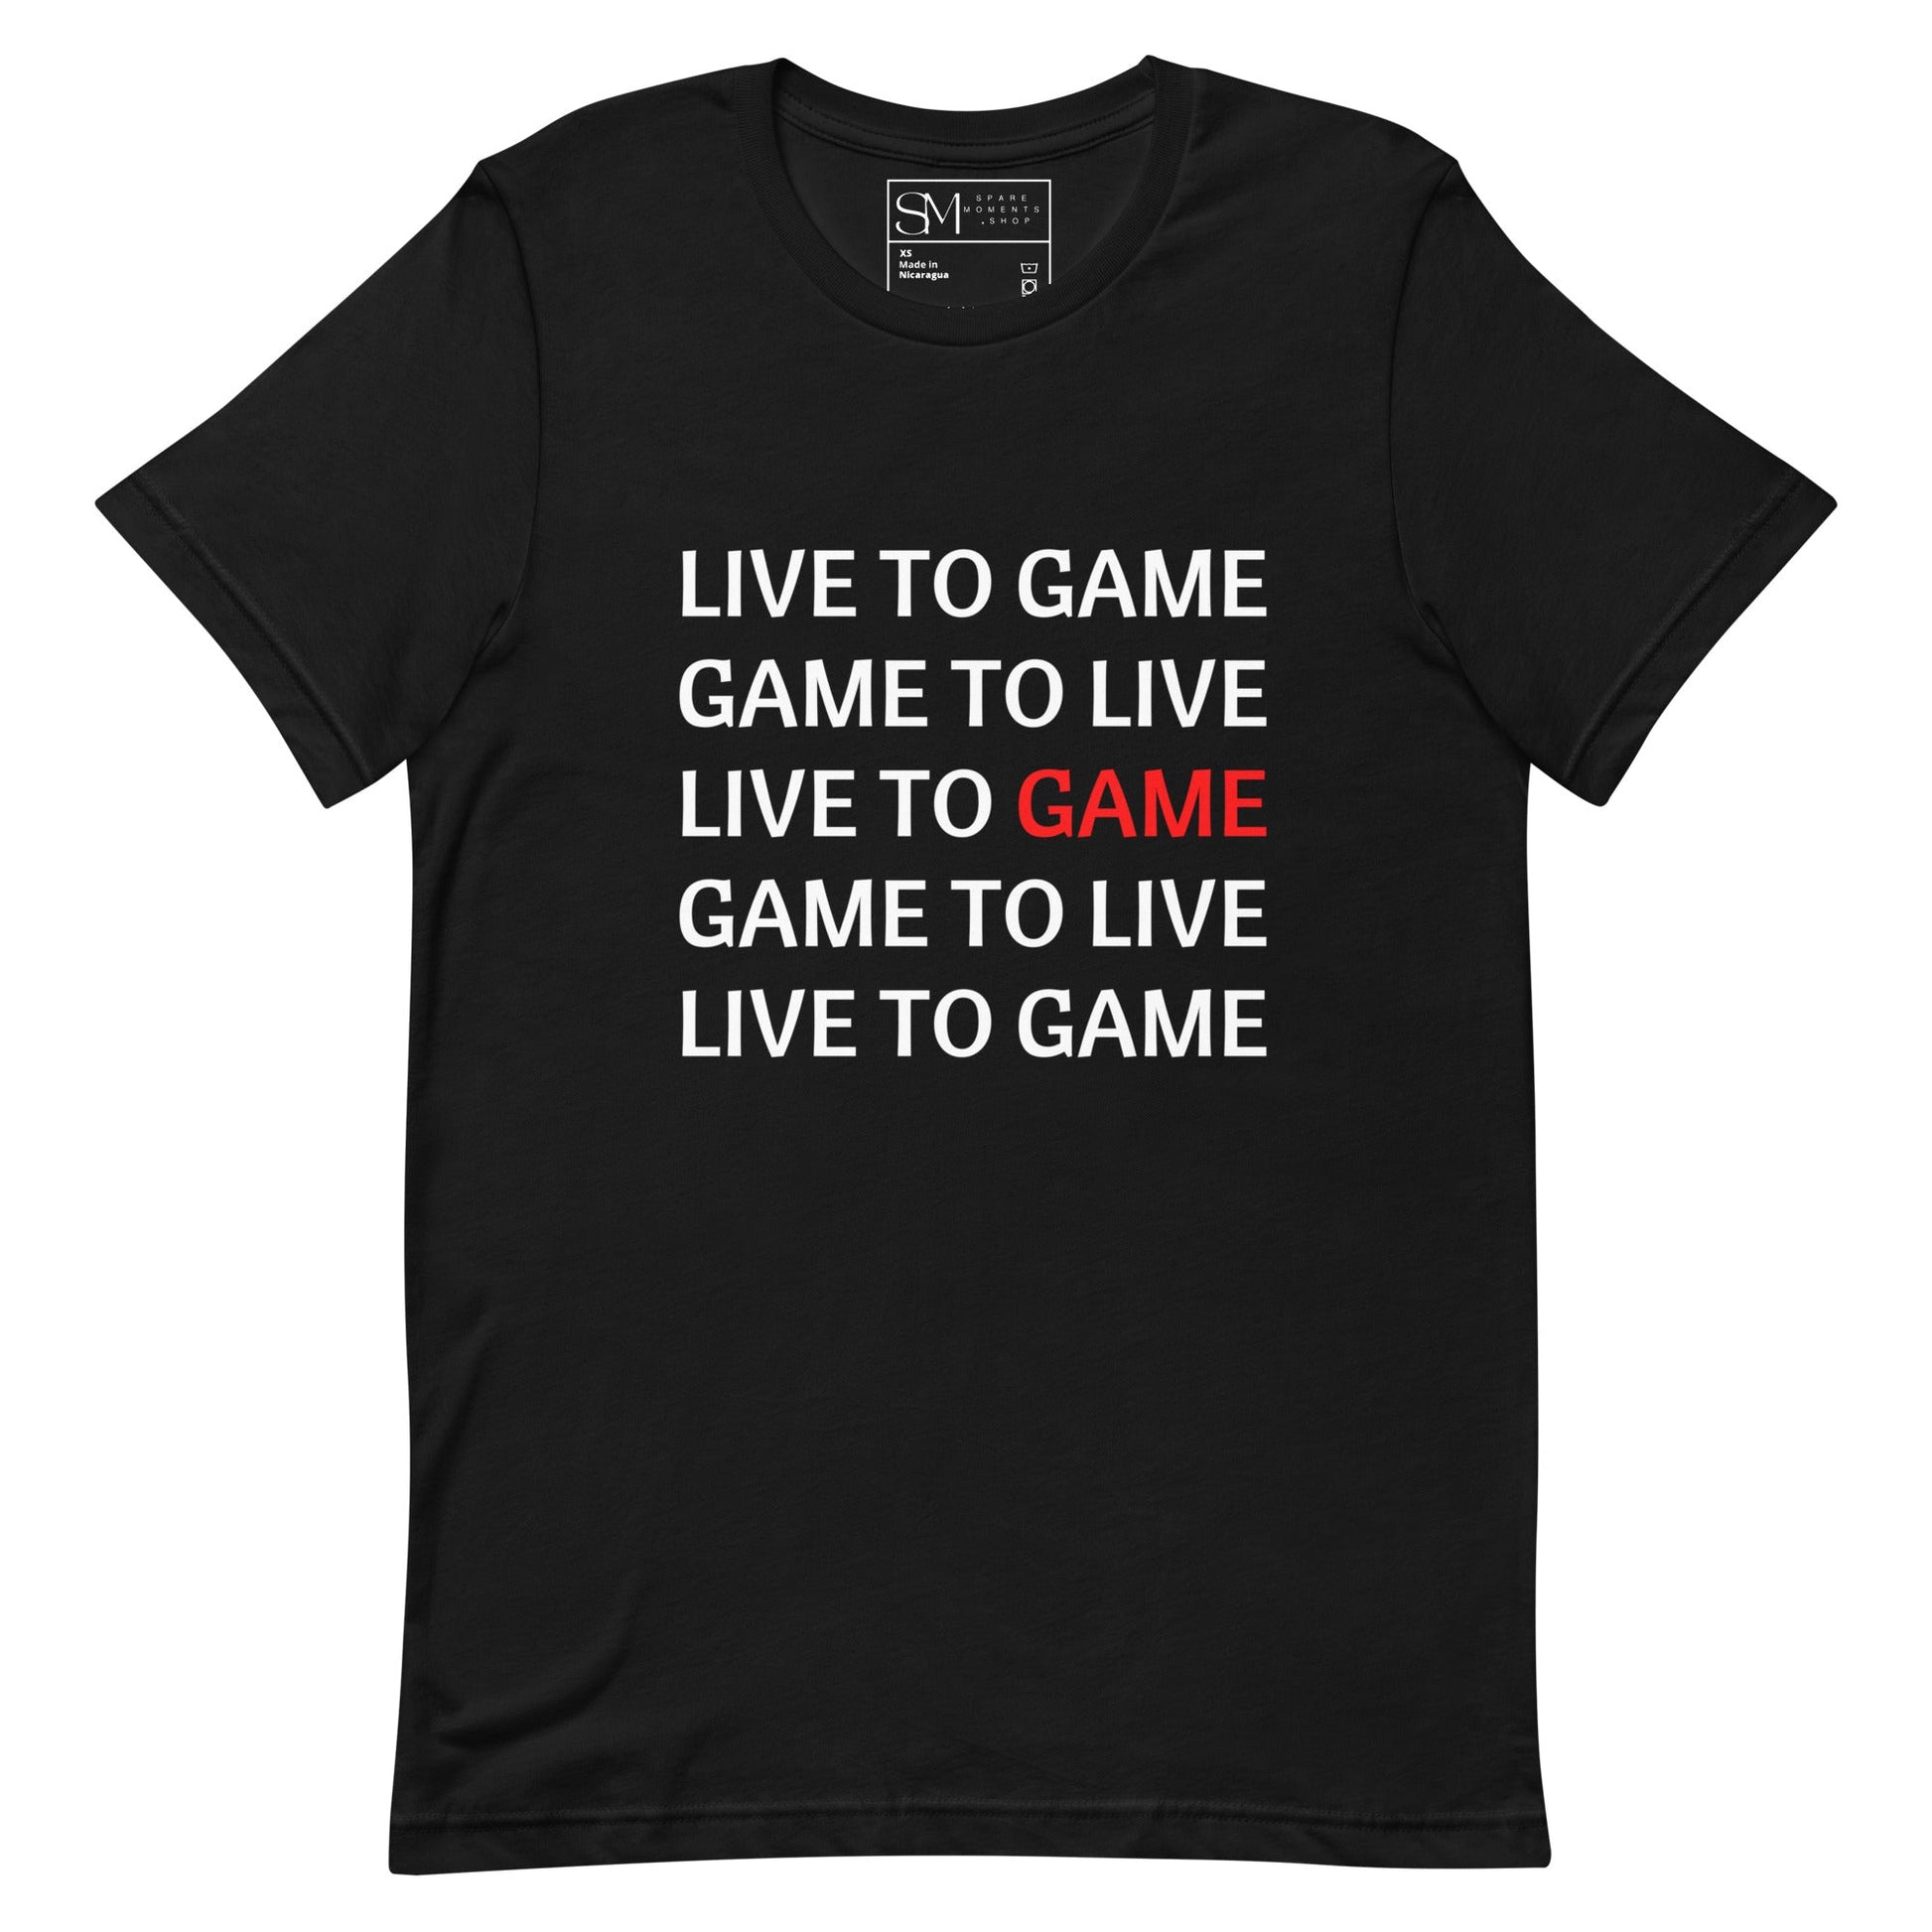 LIVE TO GAME | Unisex t-shirt